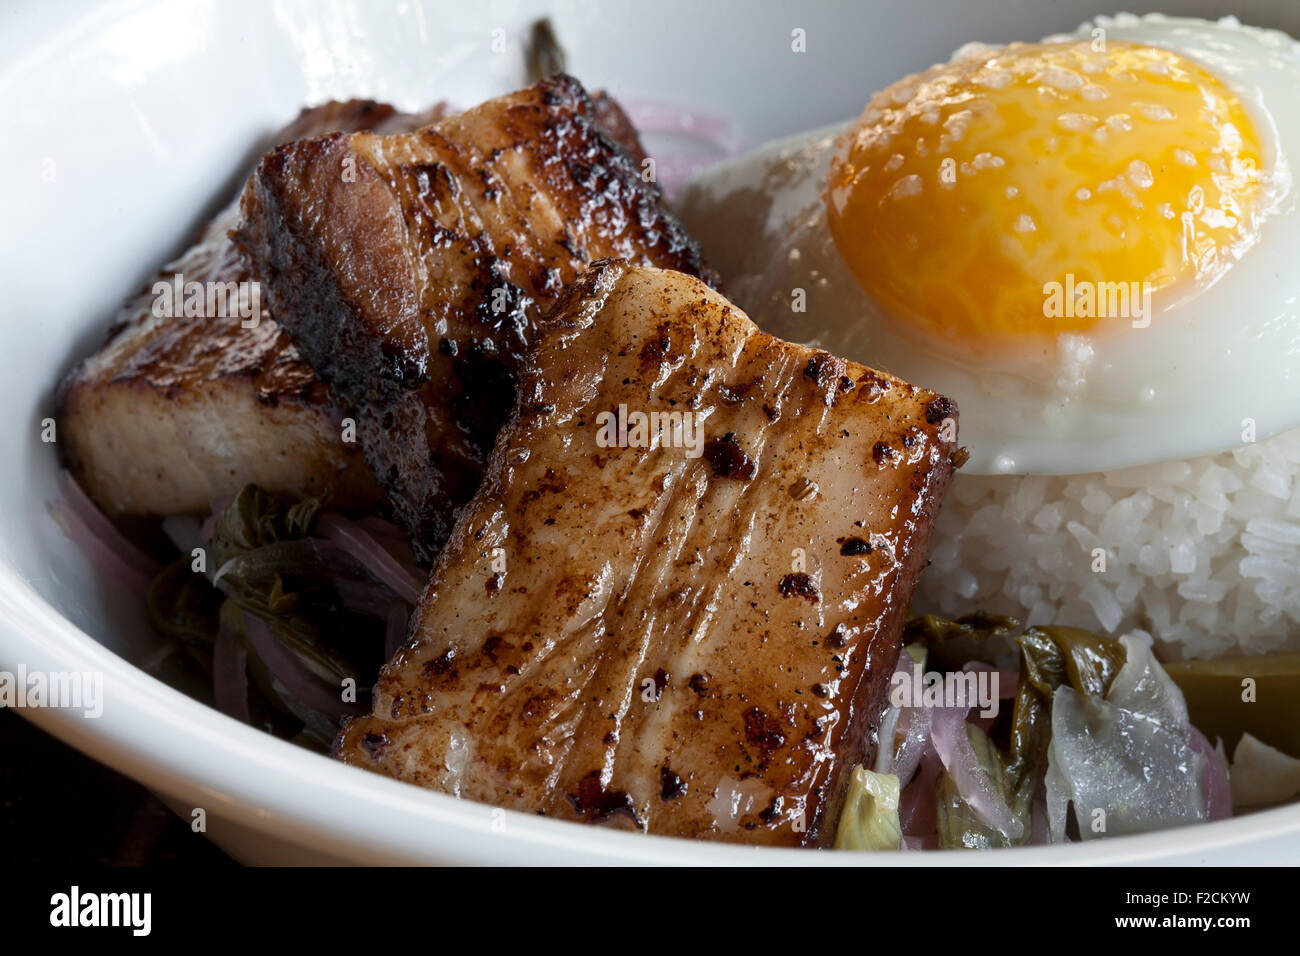 Pork belly with fried egg and rice, close-up Stock Photo